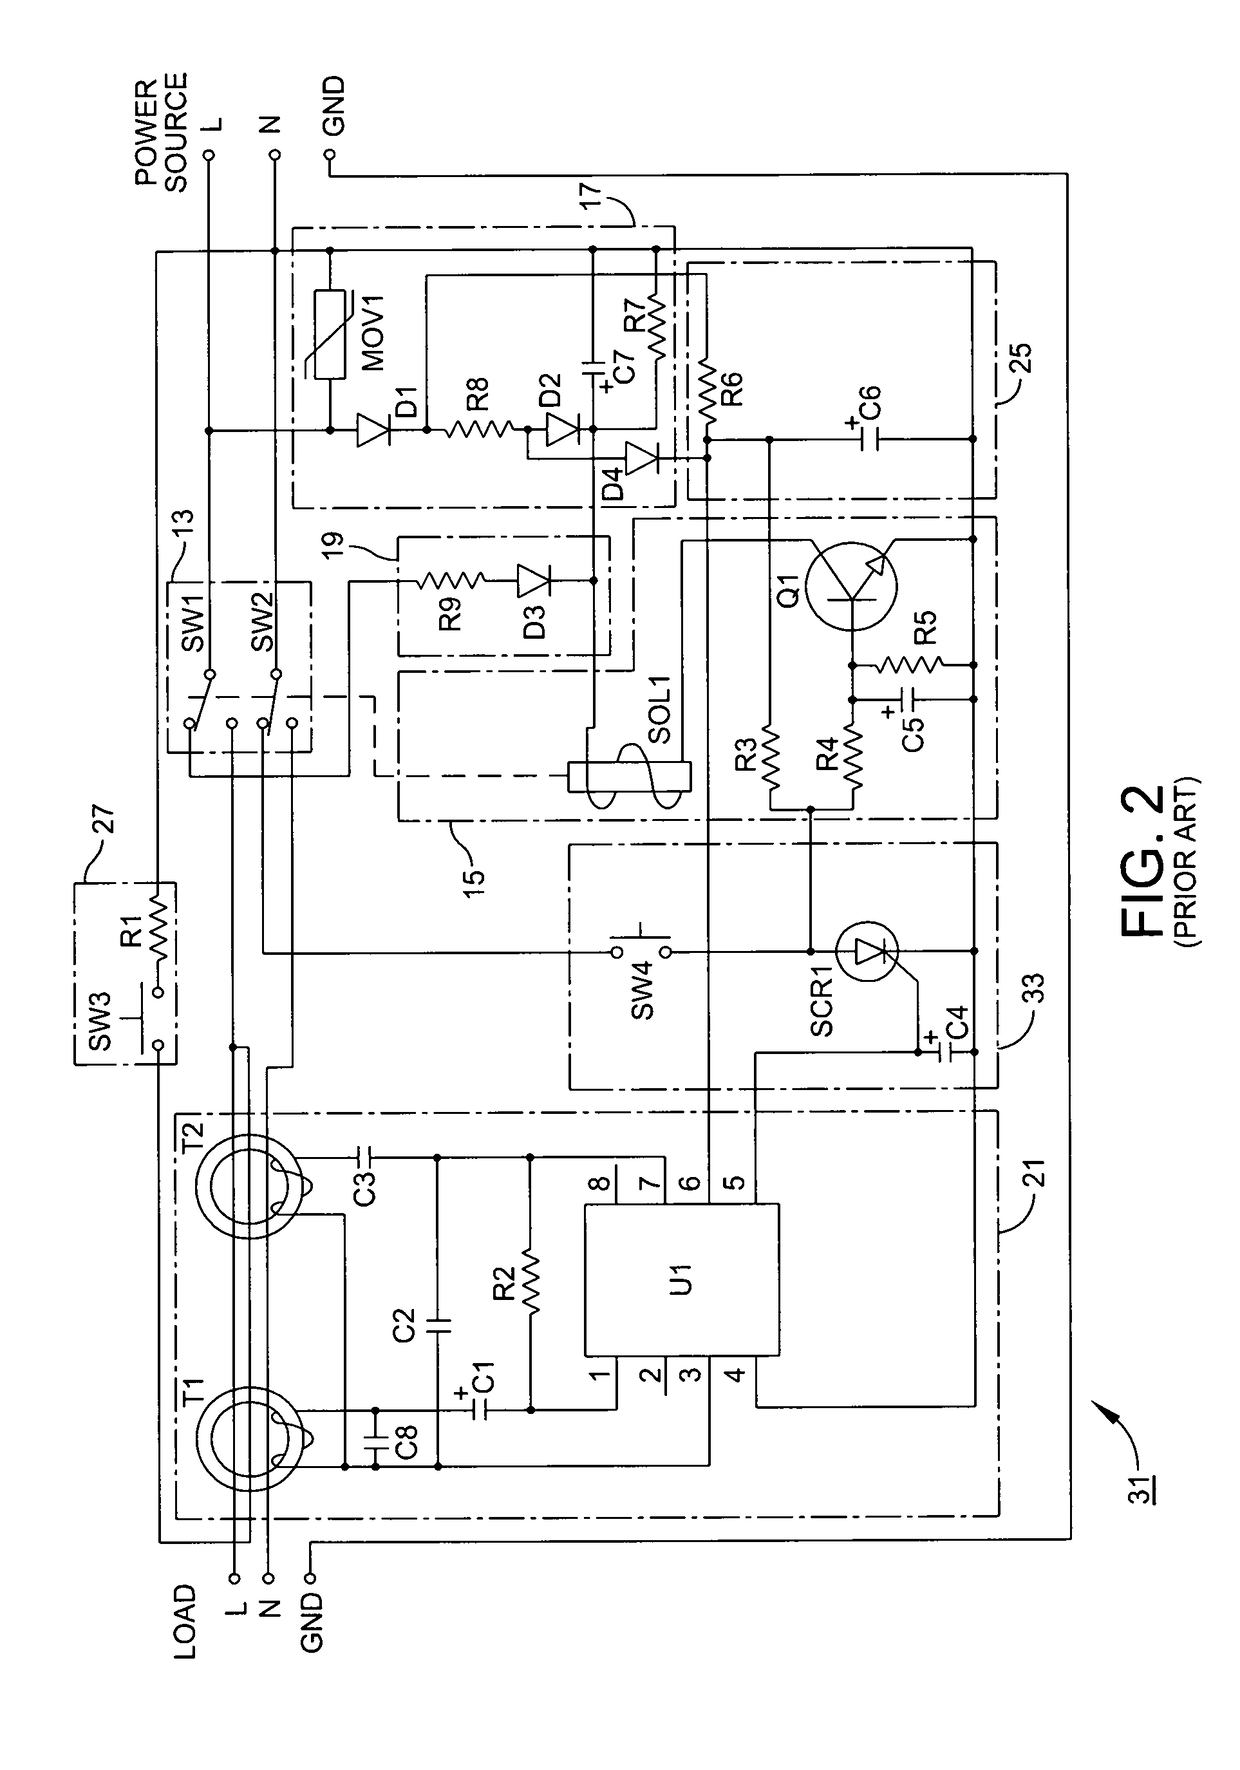 Universal ground fault circuit interrupter (GFCI) device and printed circuit board package